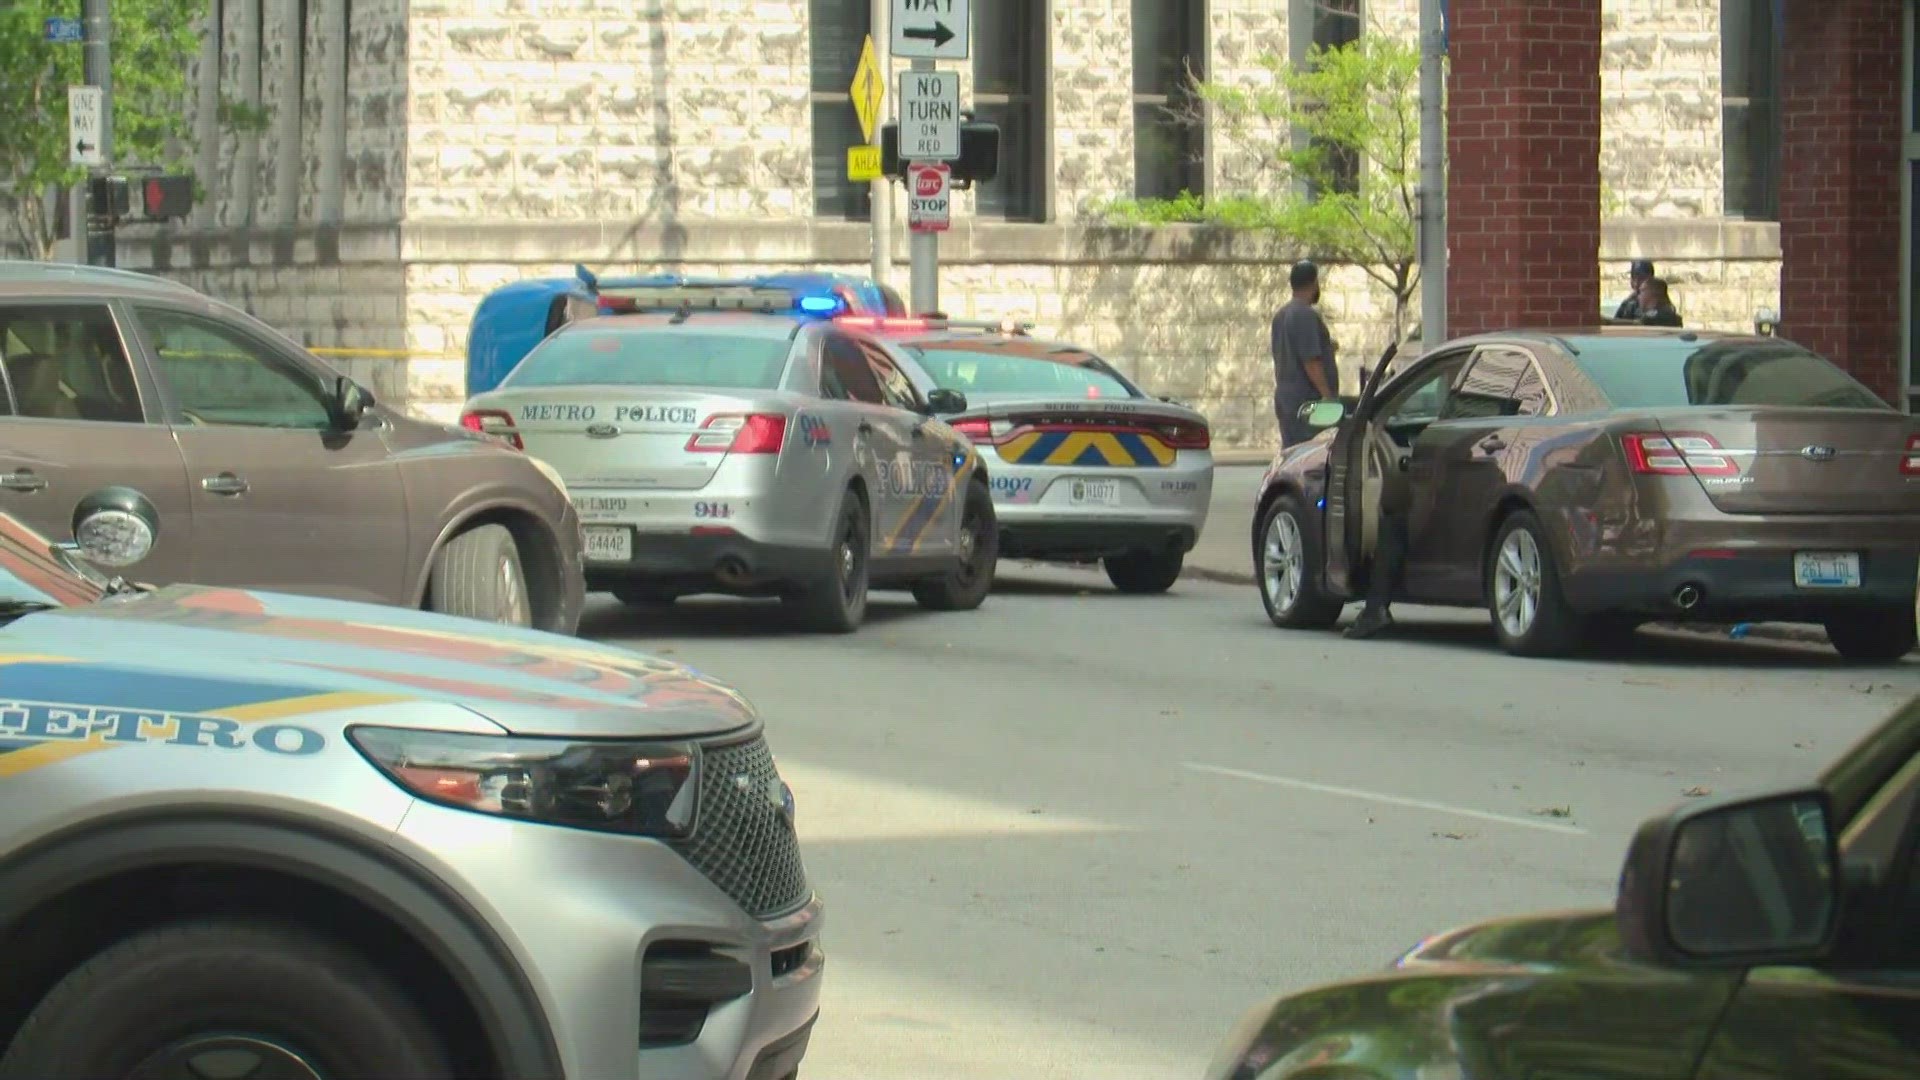 WHAS11 crews could see a car flipped over in downtown Louisville near Sixth and Liberty Streets.